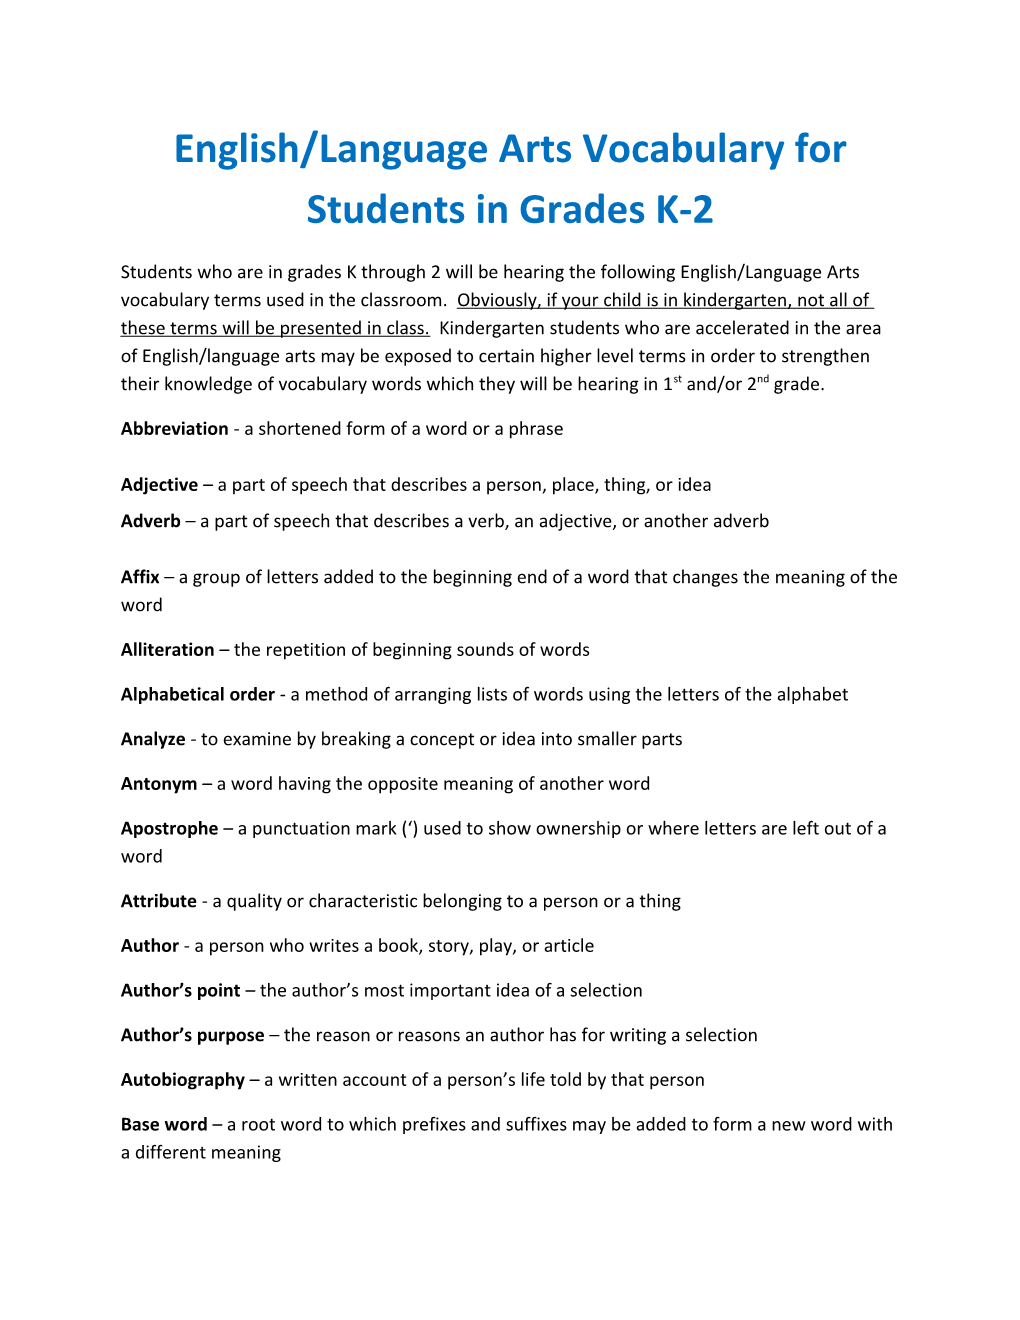 English/Language Arts Vocabulary for Students in Grades K-2